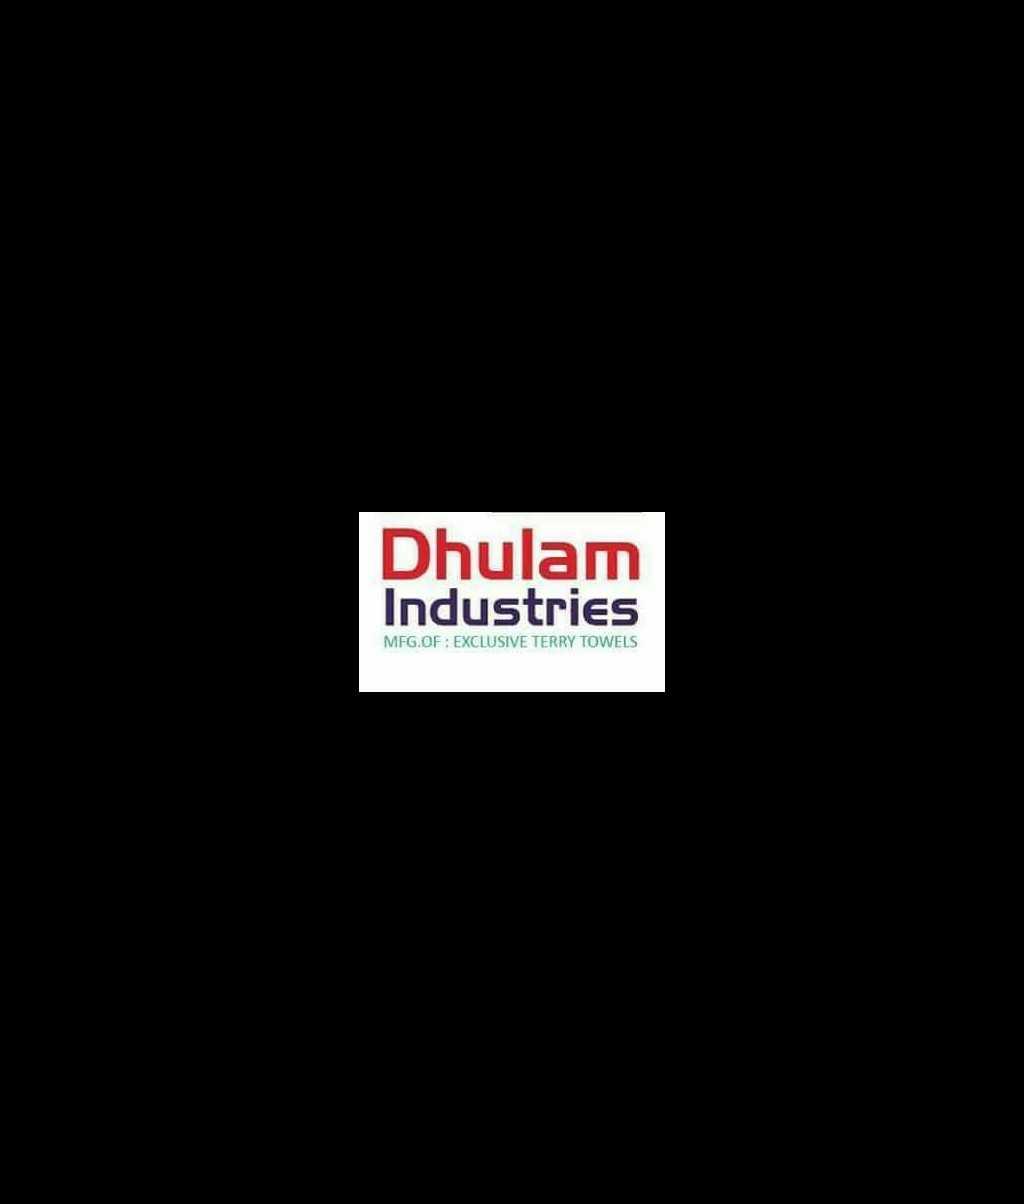 Dhulam Industries